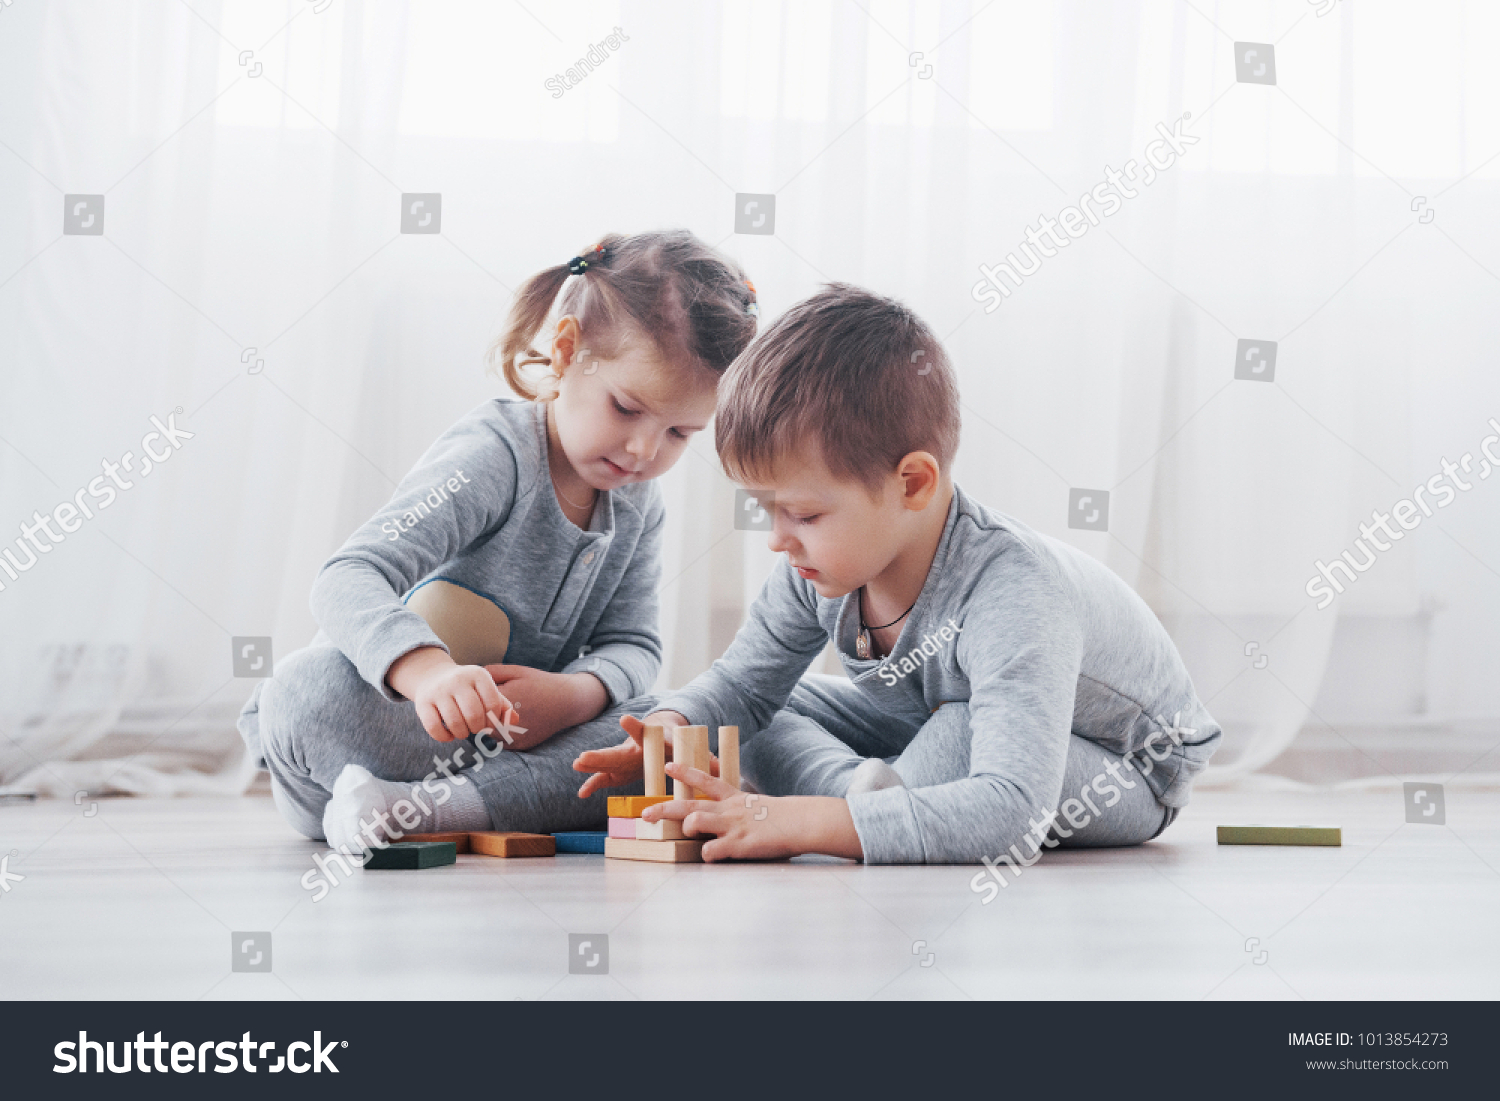 Children play with a toy designer on the floor of the children's room. Two kids playing with colorful blocks. Kindergarten educational games. #1013854273